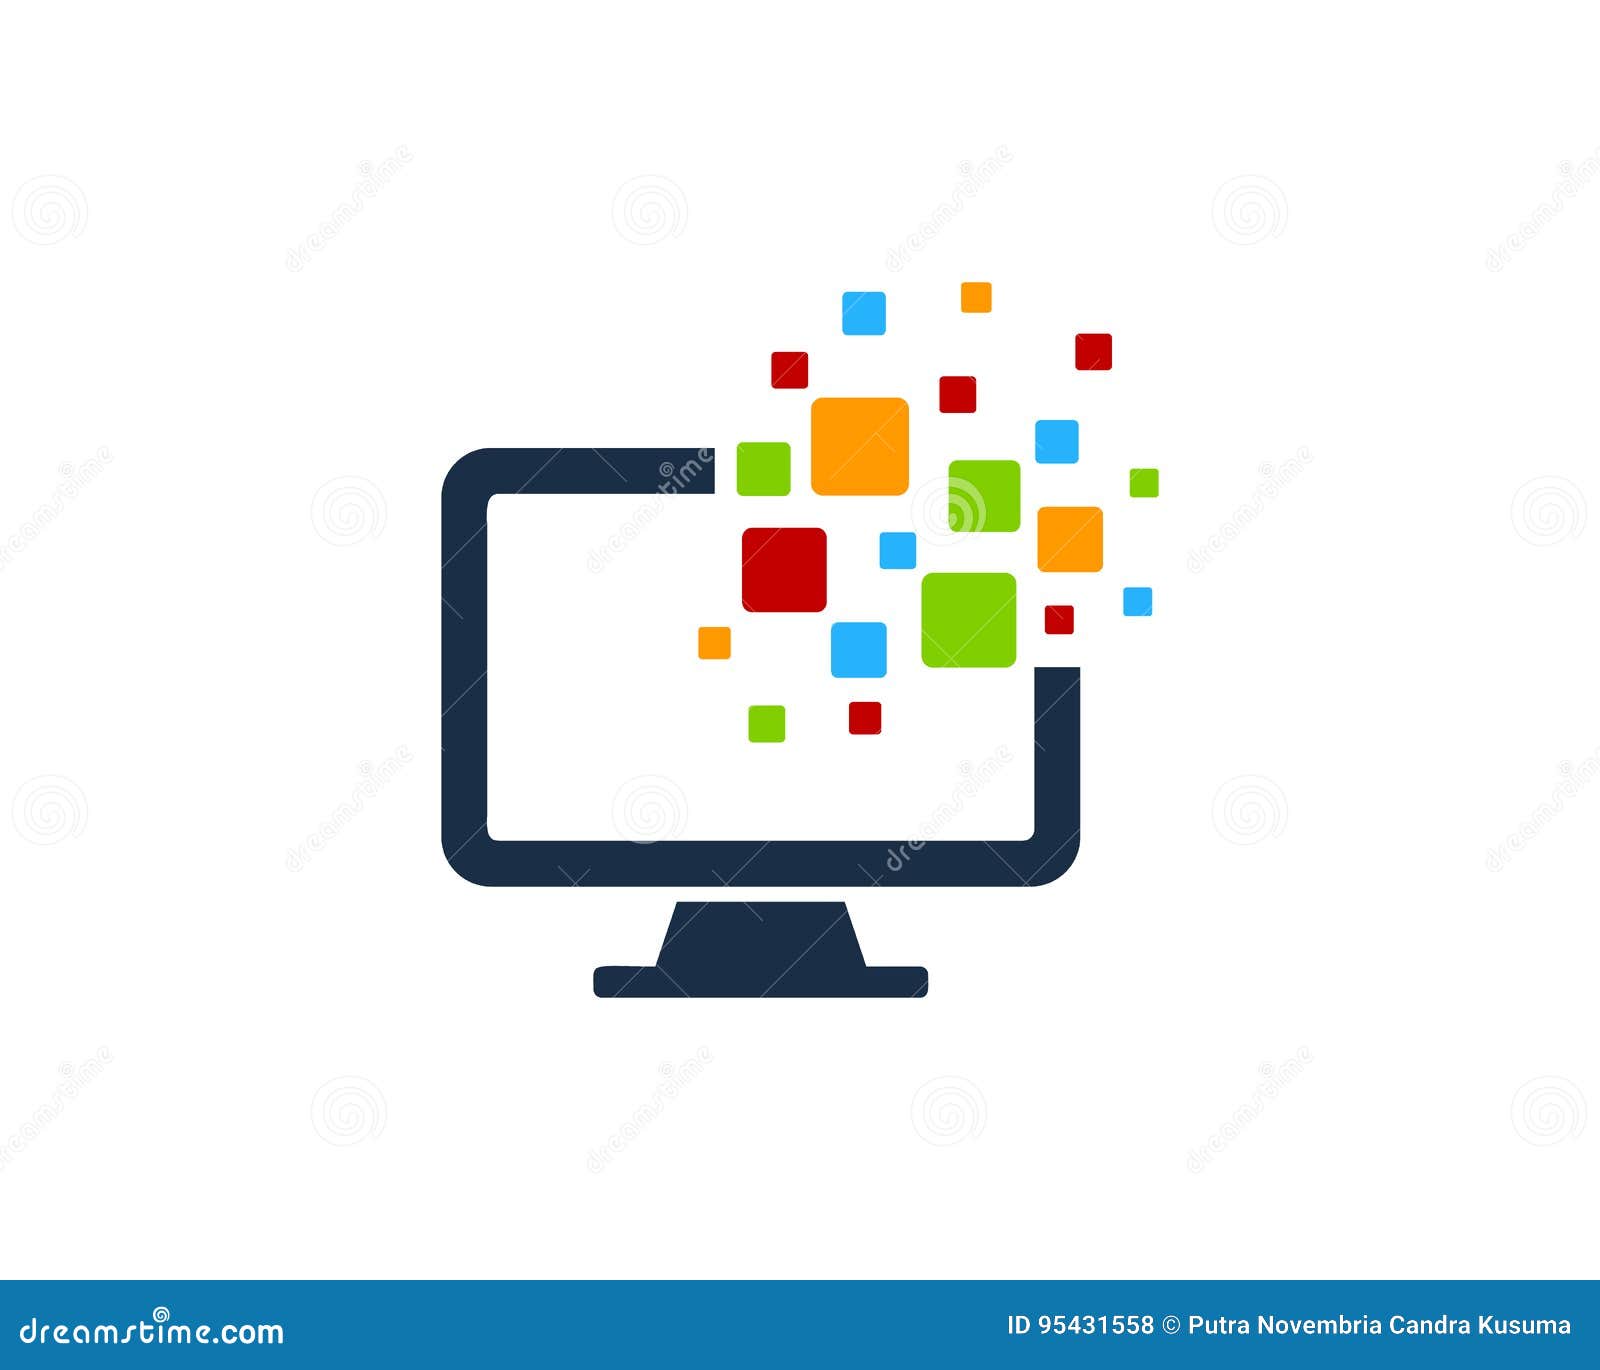 Computer Icon Logo Design Element. This design can be used as a logo, icon or as a complement to a design